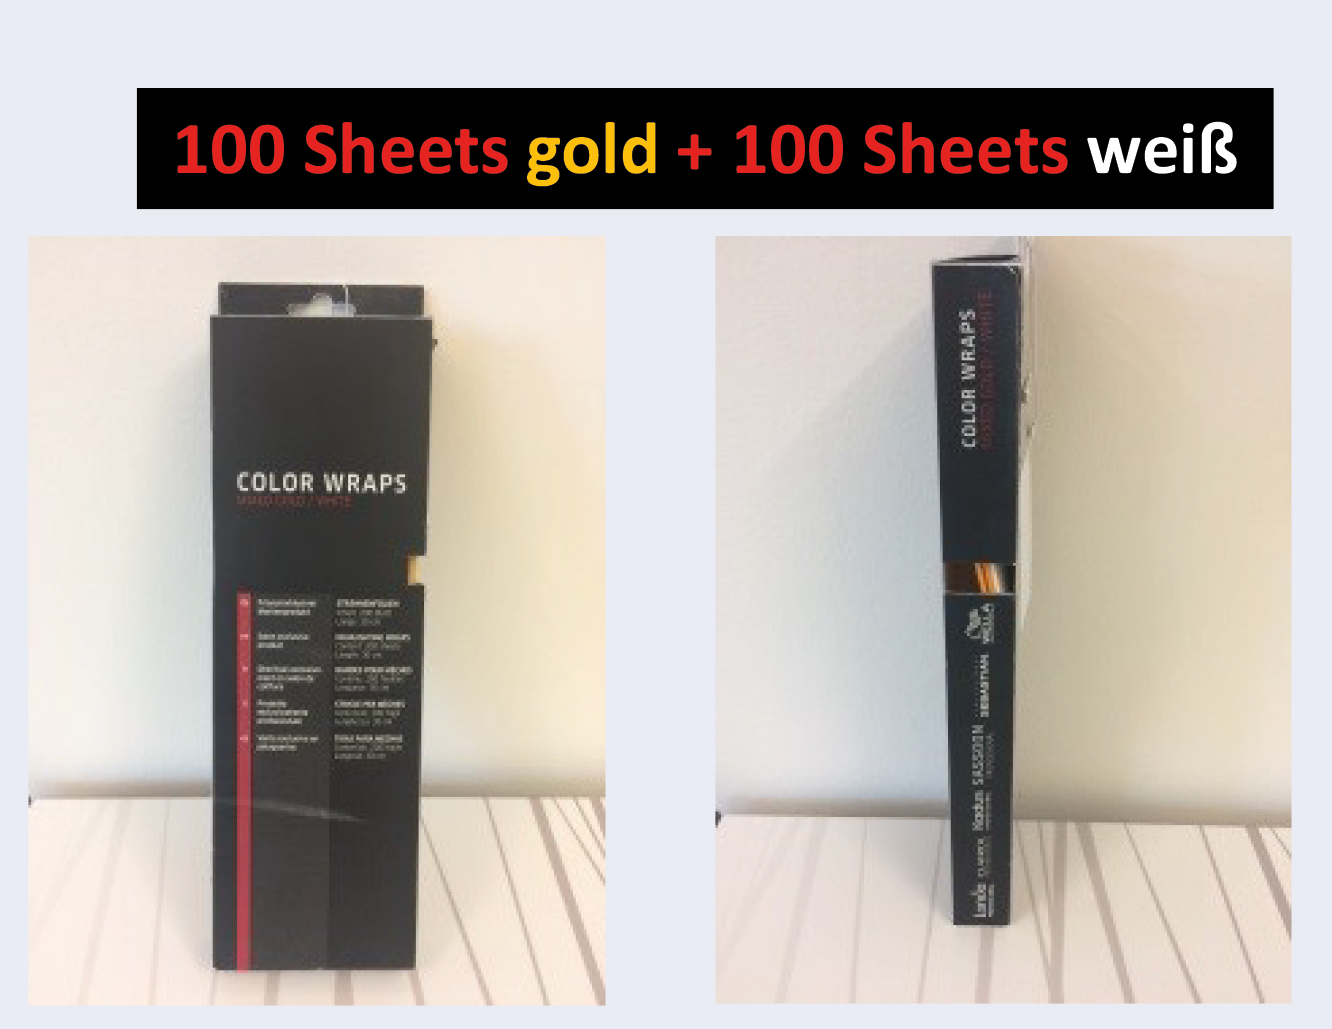 Wella Color Wraps gold+weiß P200